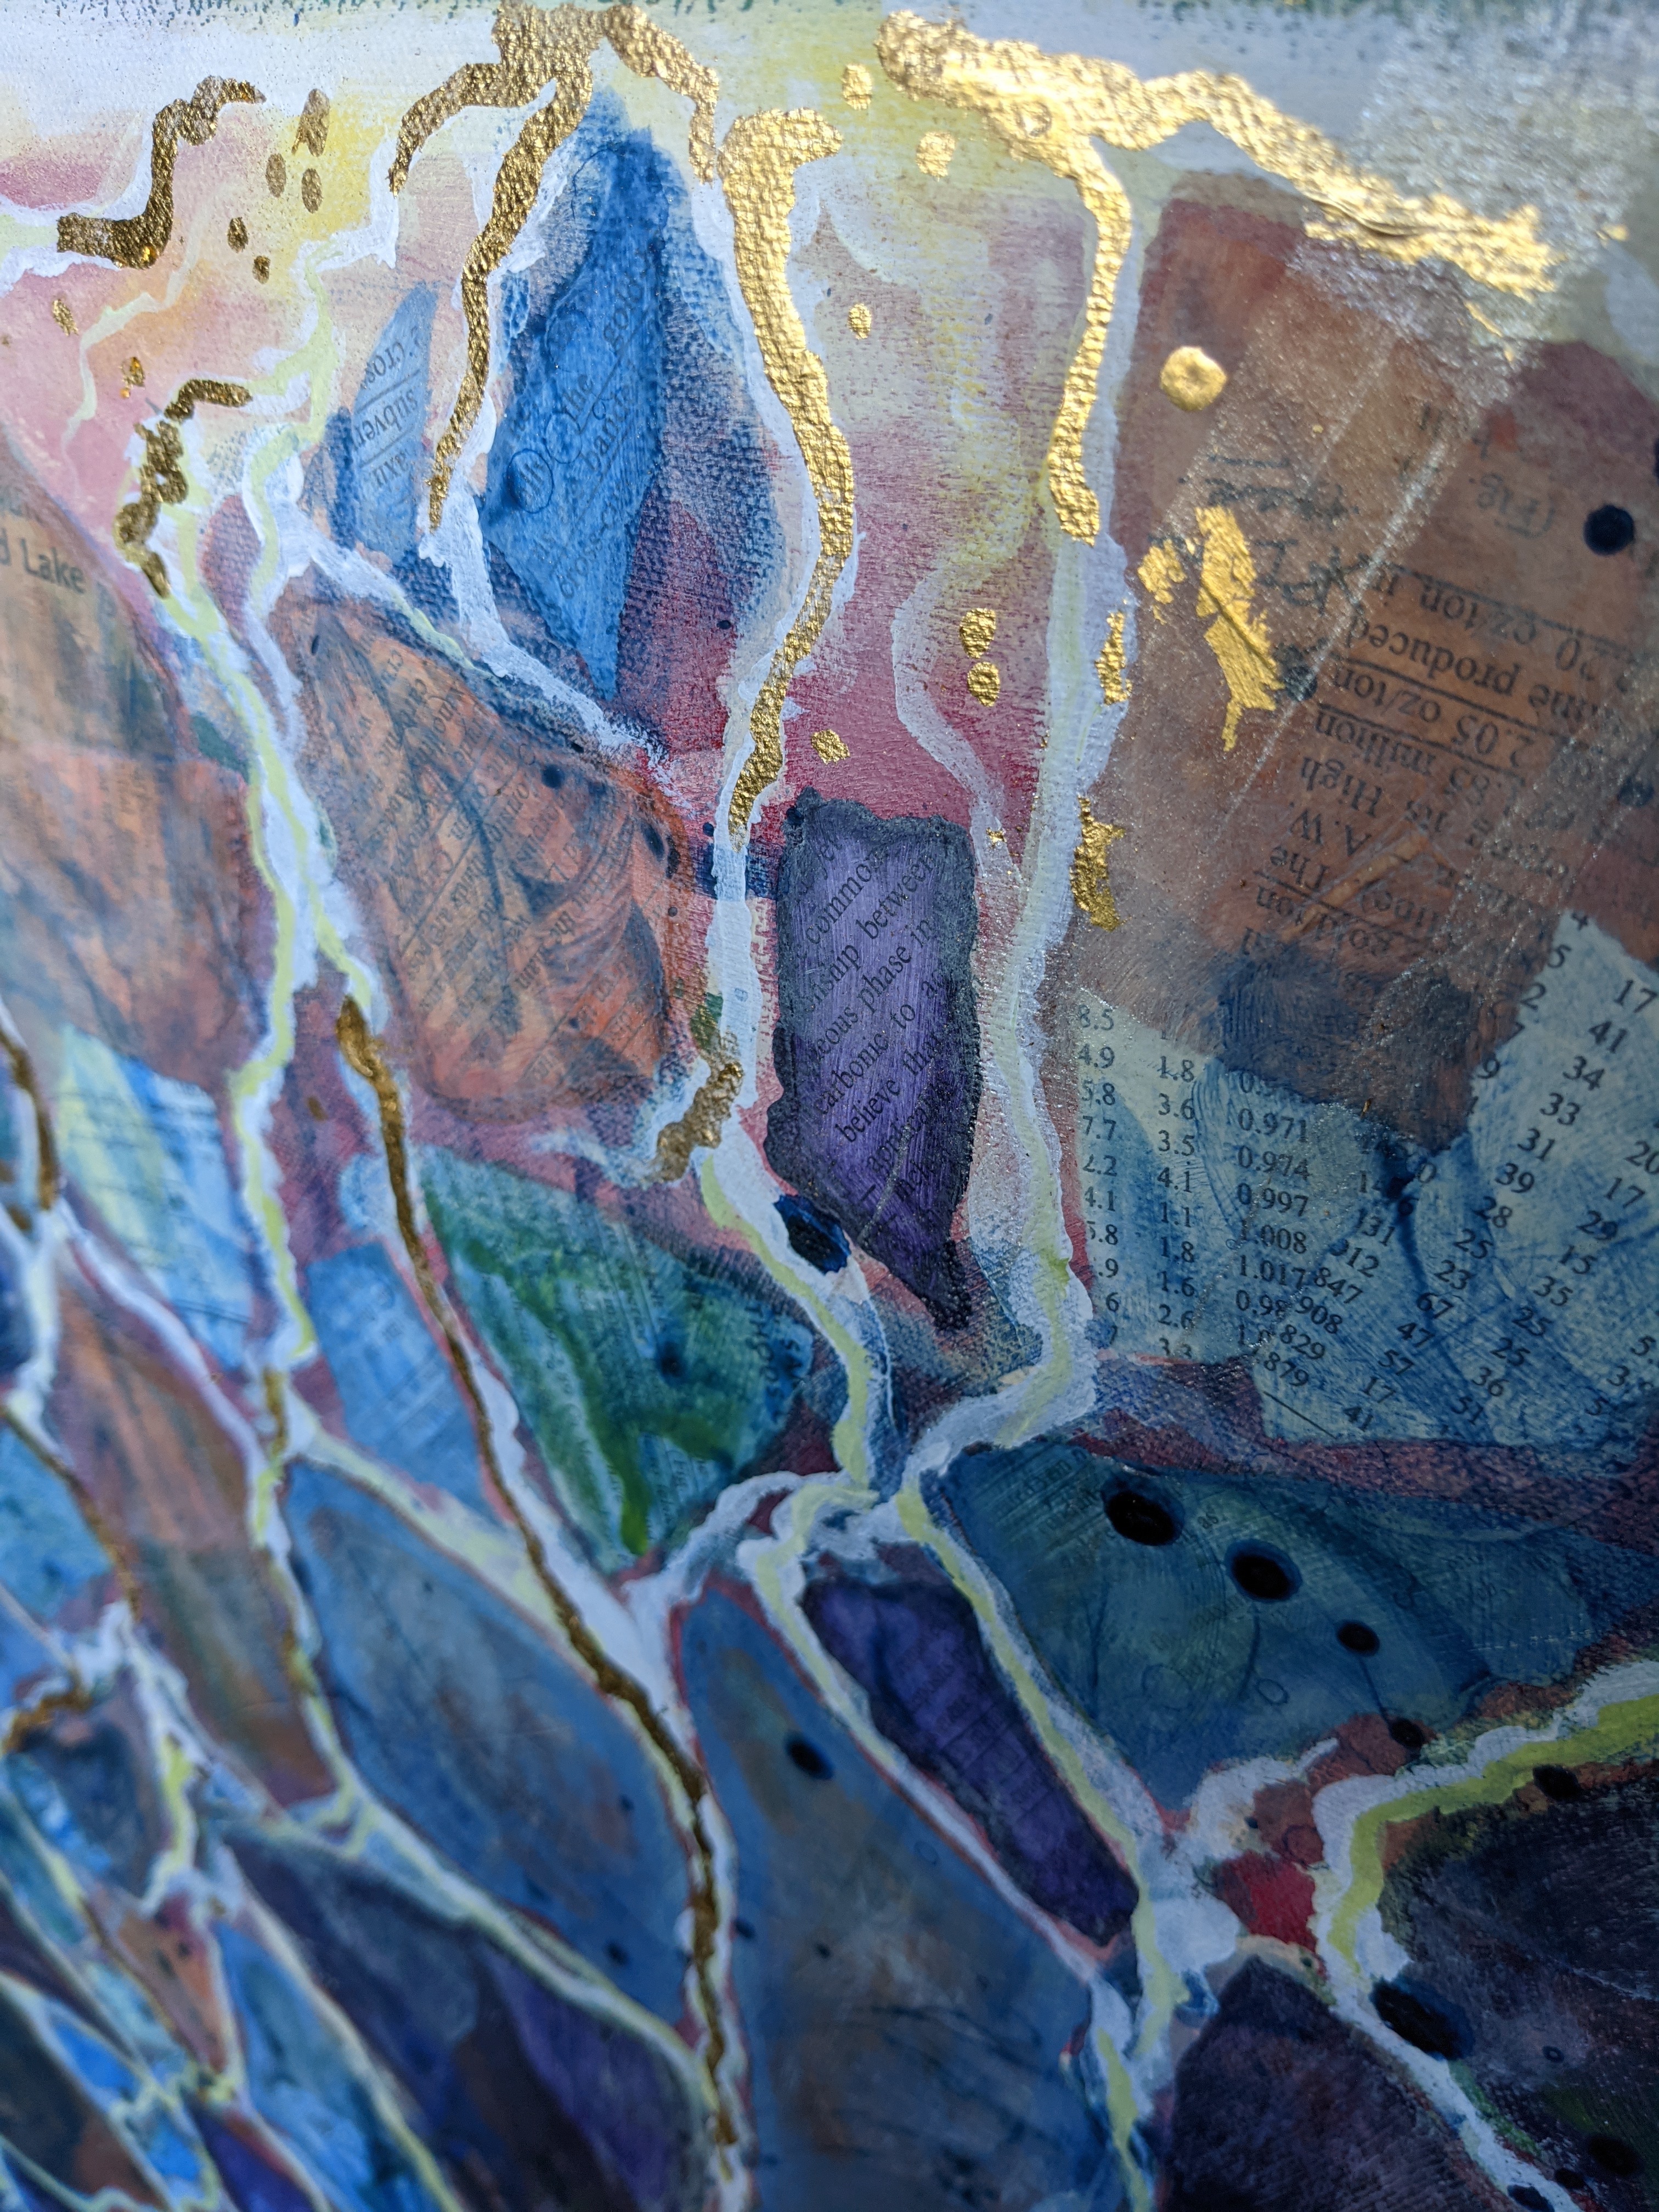 Detail of a mixed-media acrylic painting, Red Lake, by Sandra Johnstone, showing irregular disrupted blocks of text and numbers, painted in shades of blue, purple, orange and green, with the gaps between blocks highlighted by metallic gold leaf.